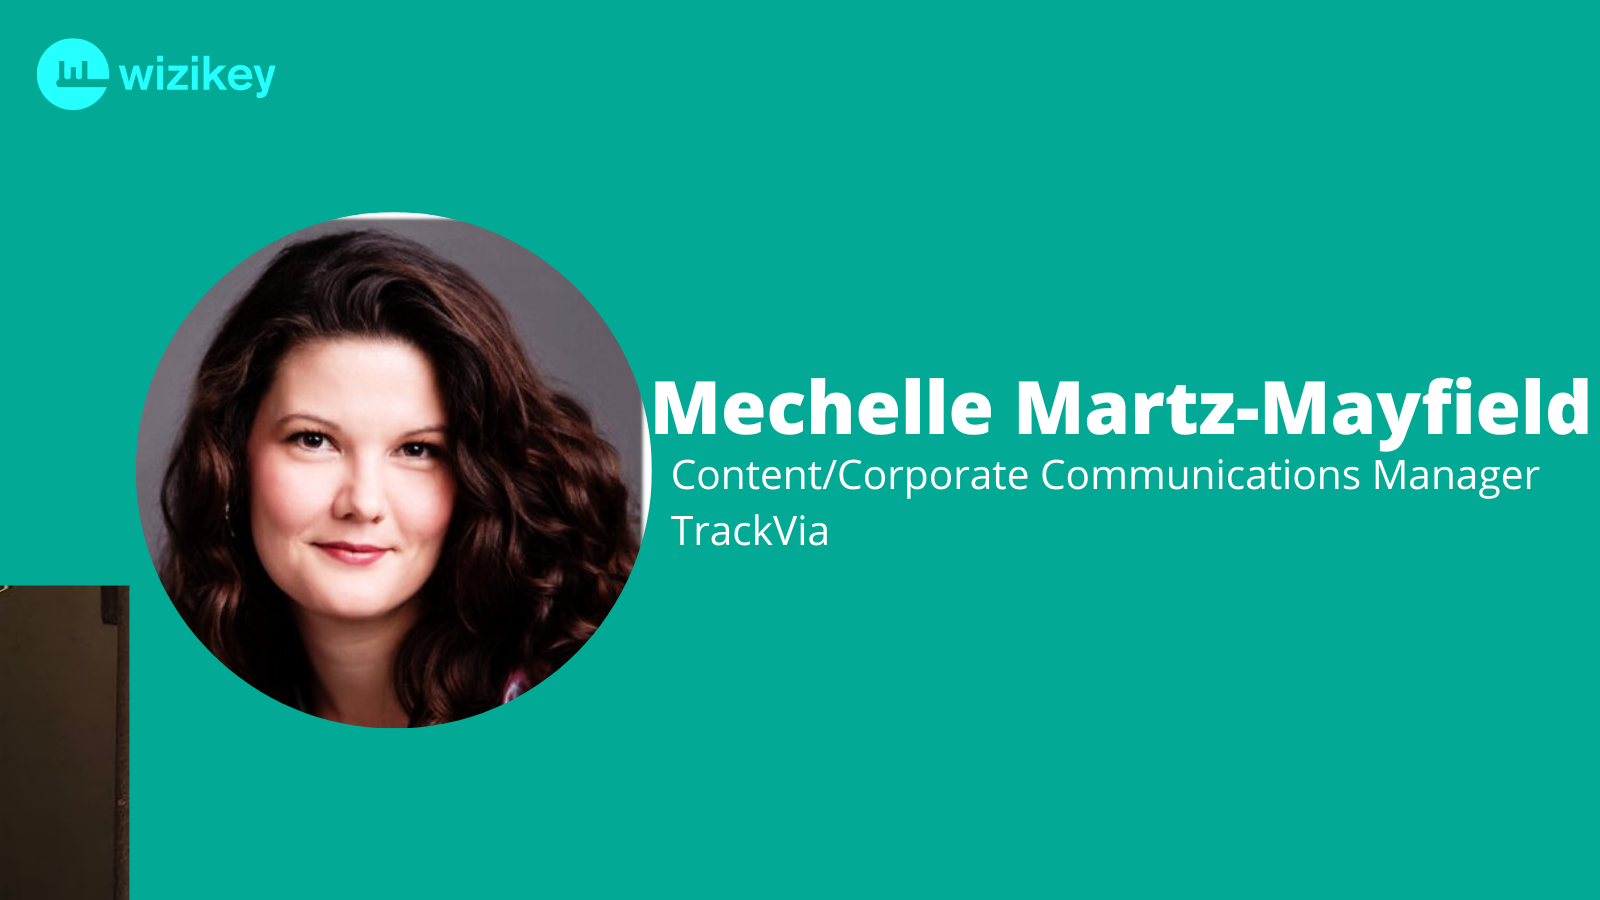 Insight into how people interact with content is valuable: Mechelle from TrackVia